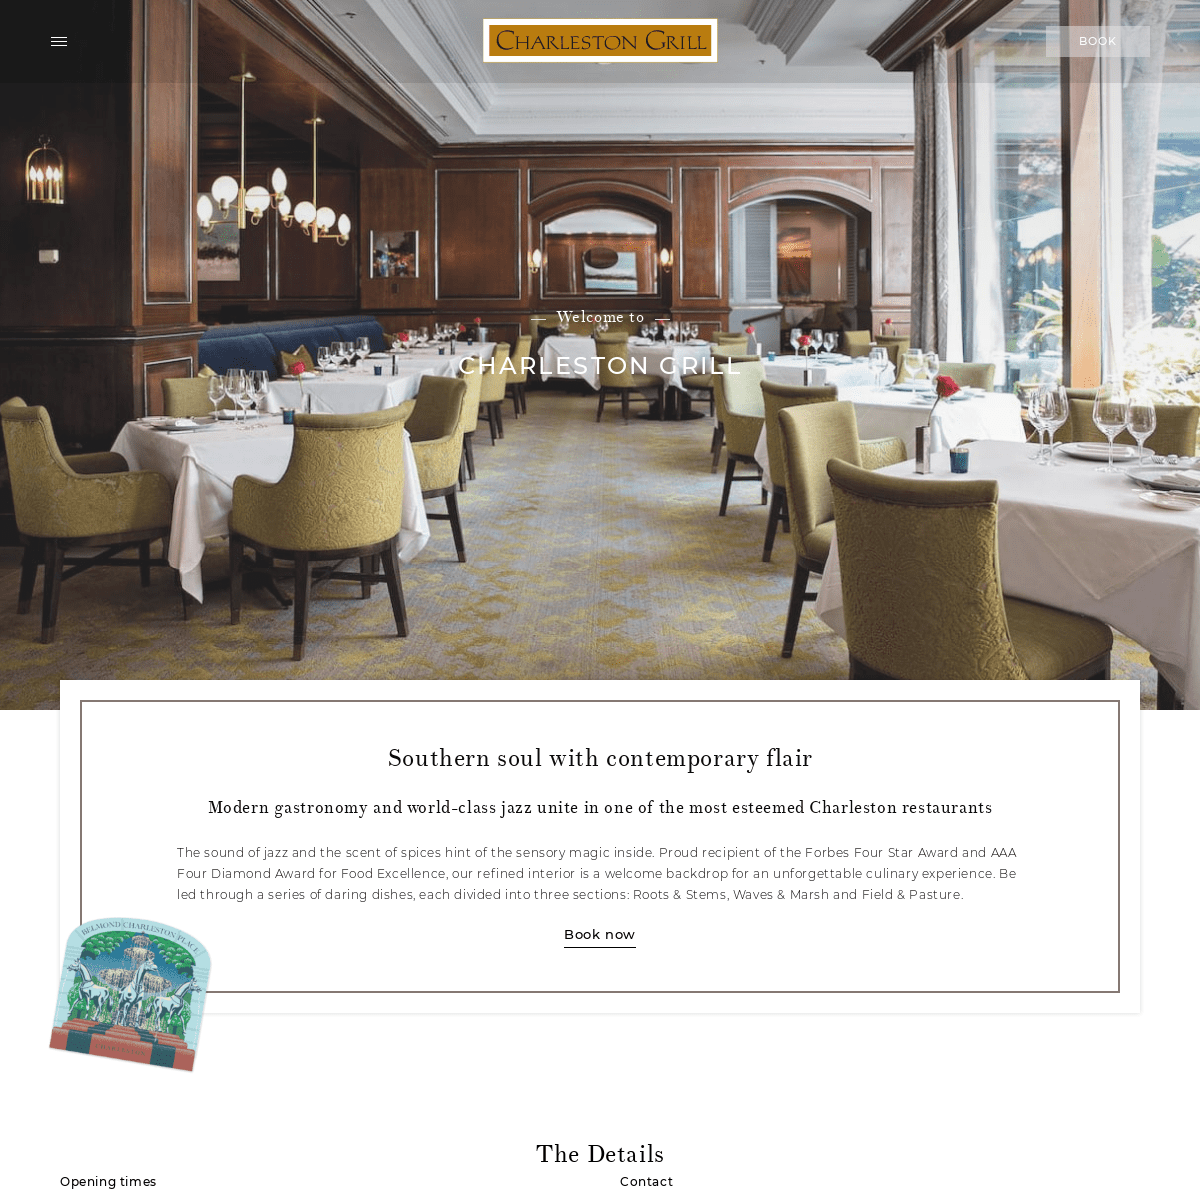 A complete backup of https://charlestongrill.com